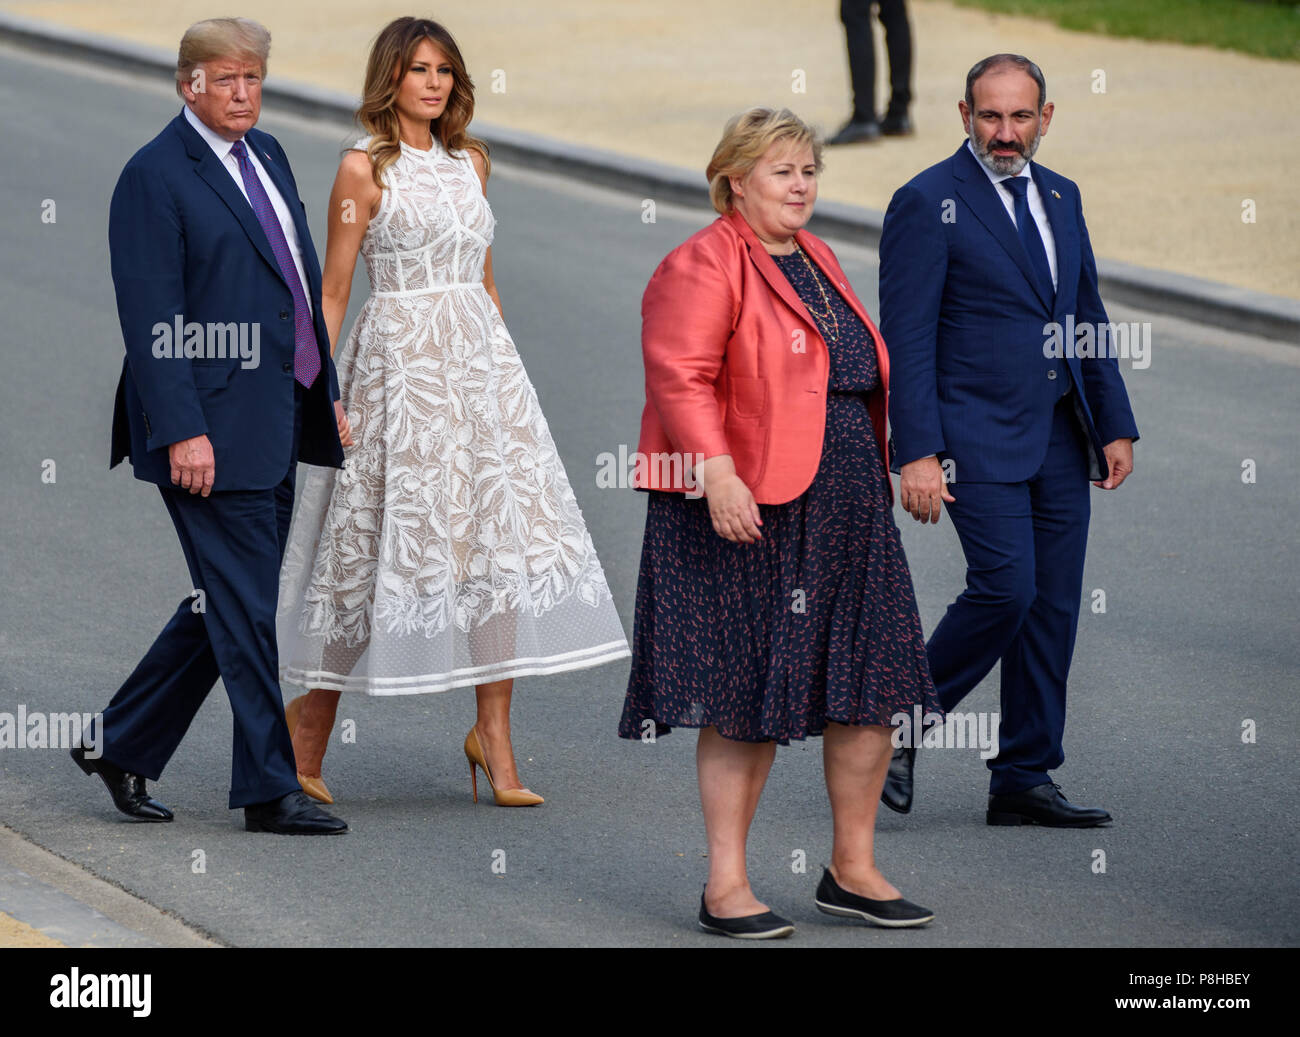 Brussels, Belgium. 11th July, 2018. 11.07.2018. BRUSSELS, BELGIUM. Melania  Trump and Donald Trump, during Family photo before Working dinner, during  NATO SUMMIT 2018 Credit: Gints Ivuskans/Alamy Live News Stock Photo - Alamy